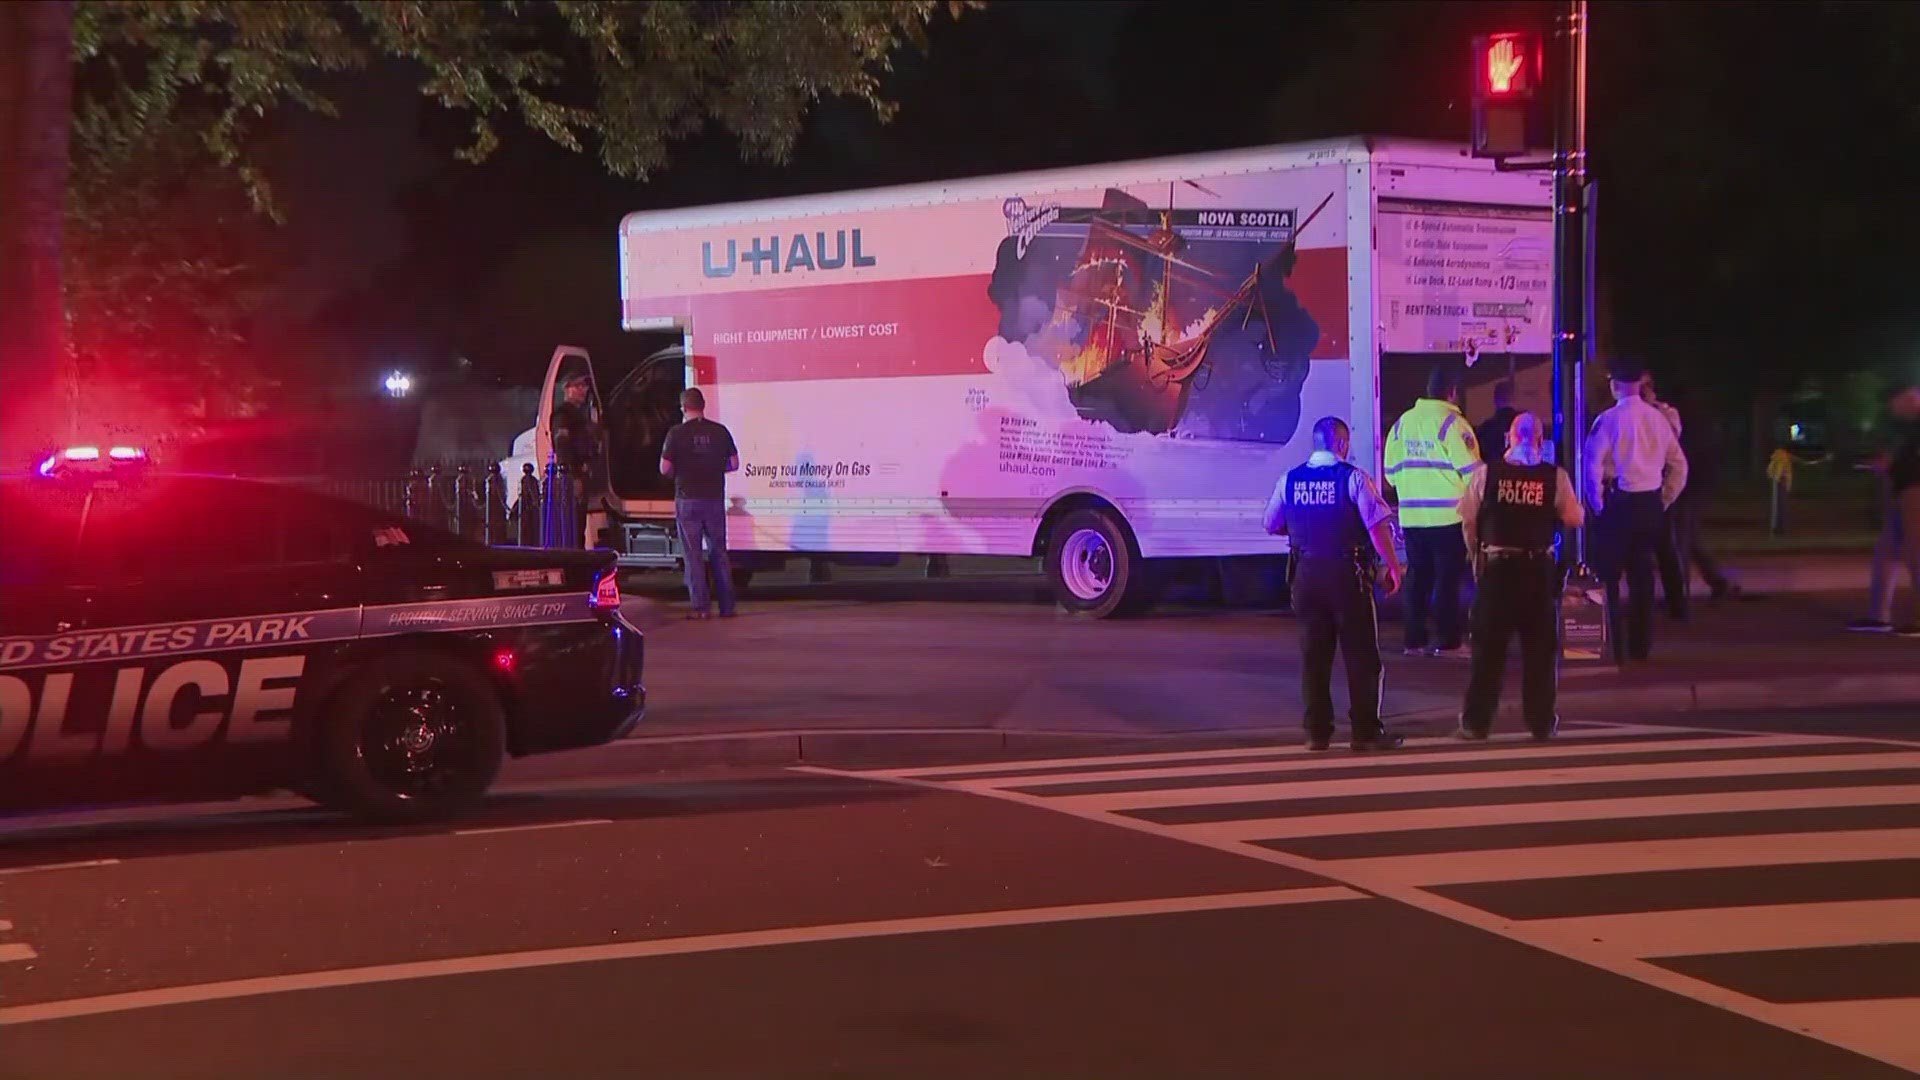 Sai Kandula, 19, is charged with one federal charge for damaging property. Prosecutors say he drove his U-Haul into a barrier at the White House in May.